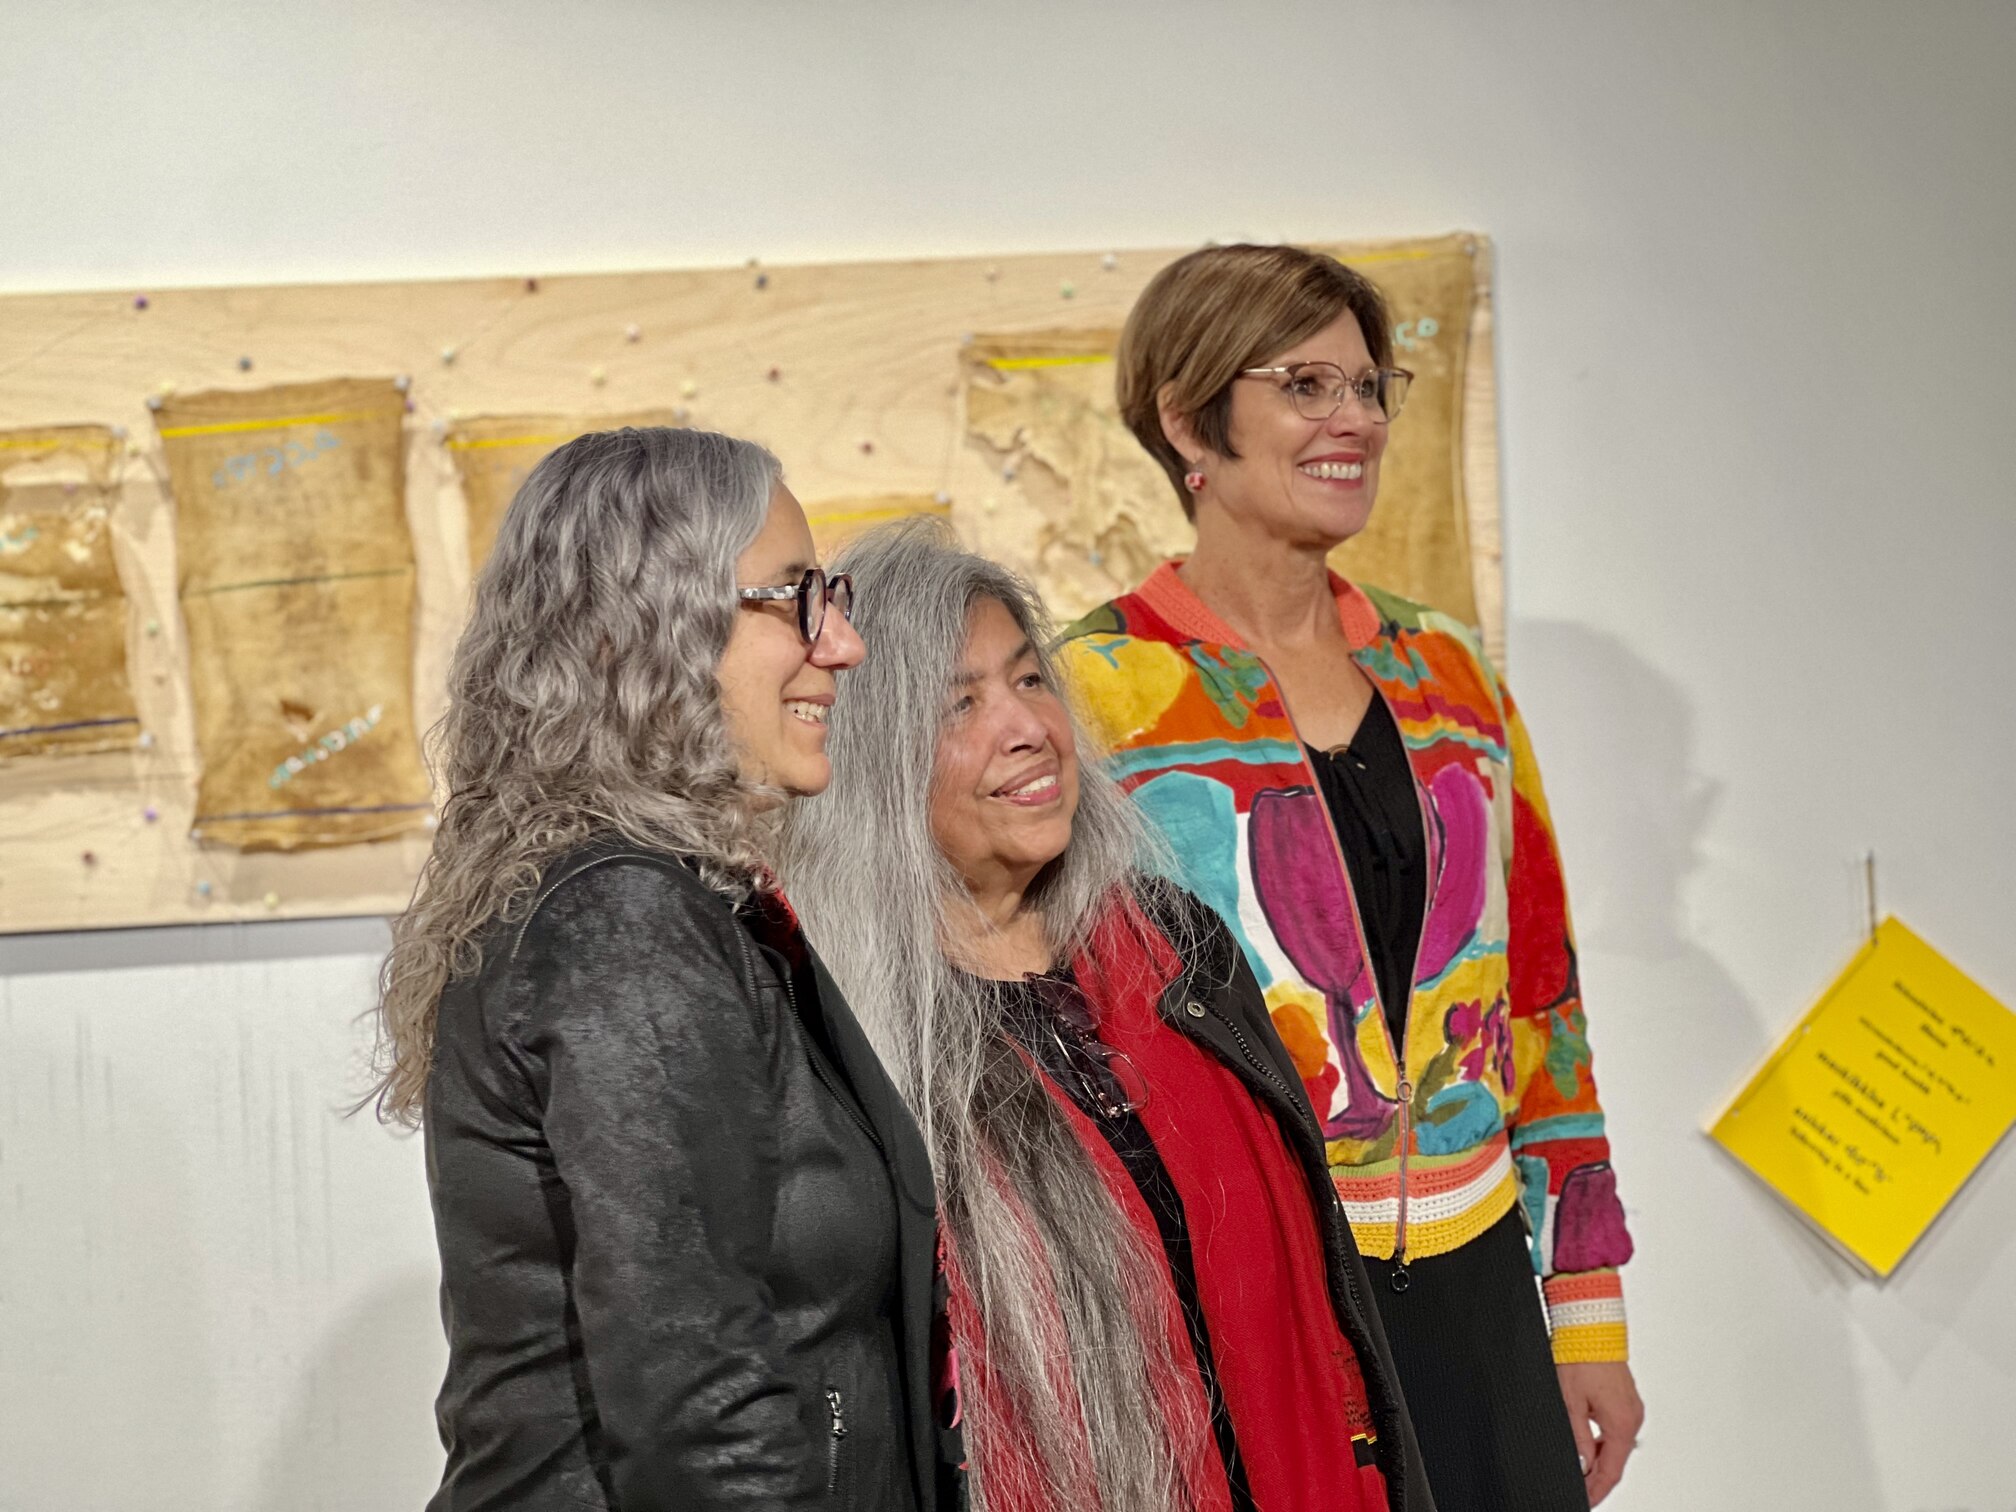 Pictured: Linda Young at her gallery show with CGPS Dean Debby Burshtyn (left) and supervisor Debbie Pushor (right). Photo credit: Connor Jay and Michael Olson 